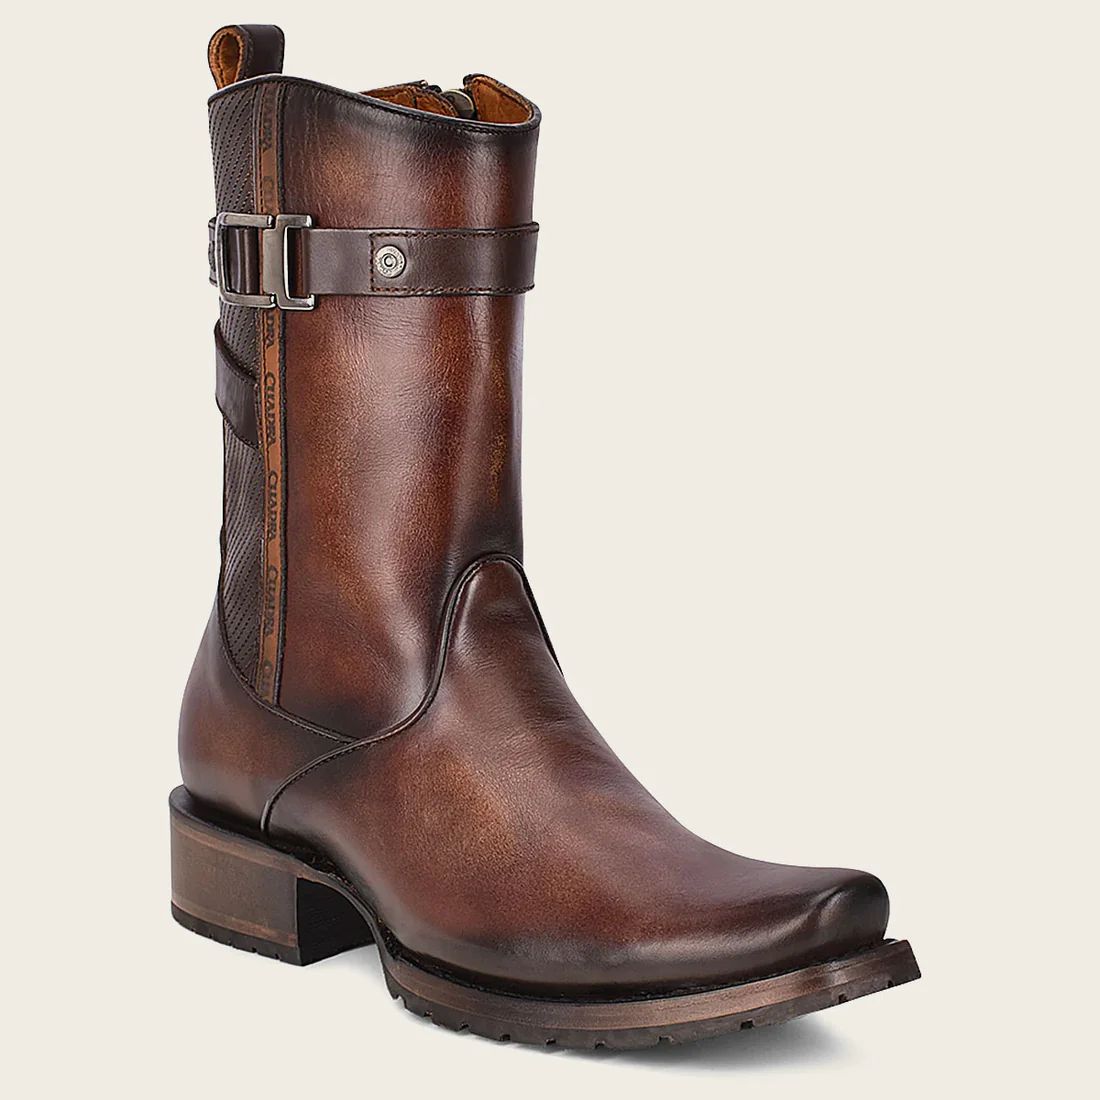 Cuadra | Hand-Painted Brown Leather Urban Boot